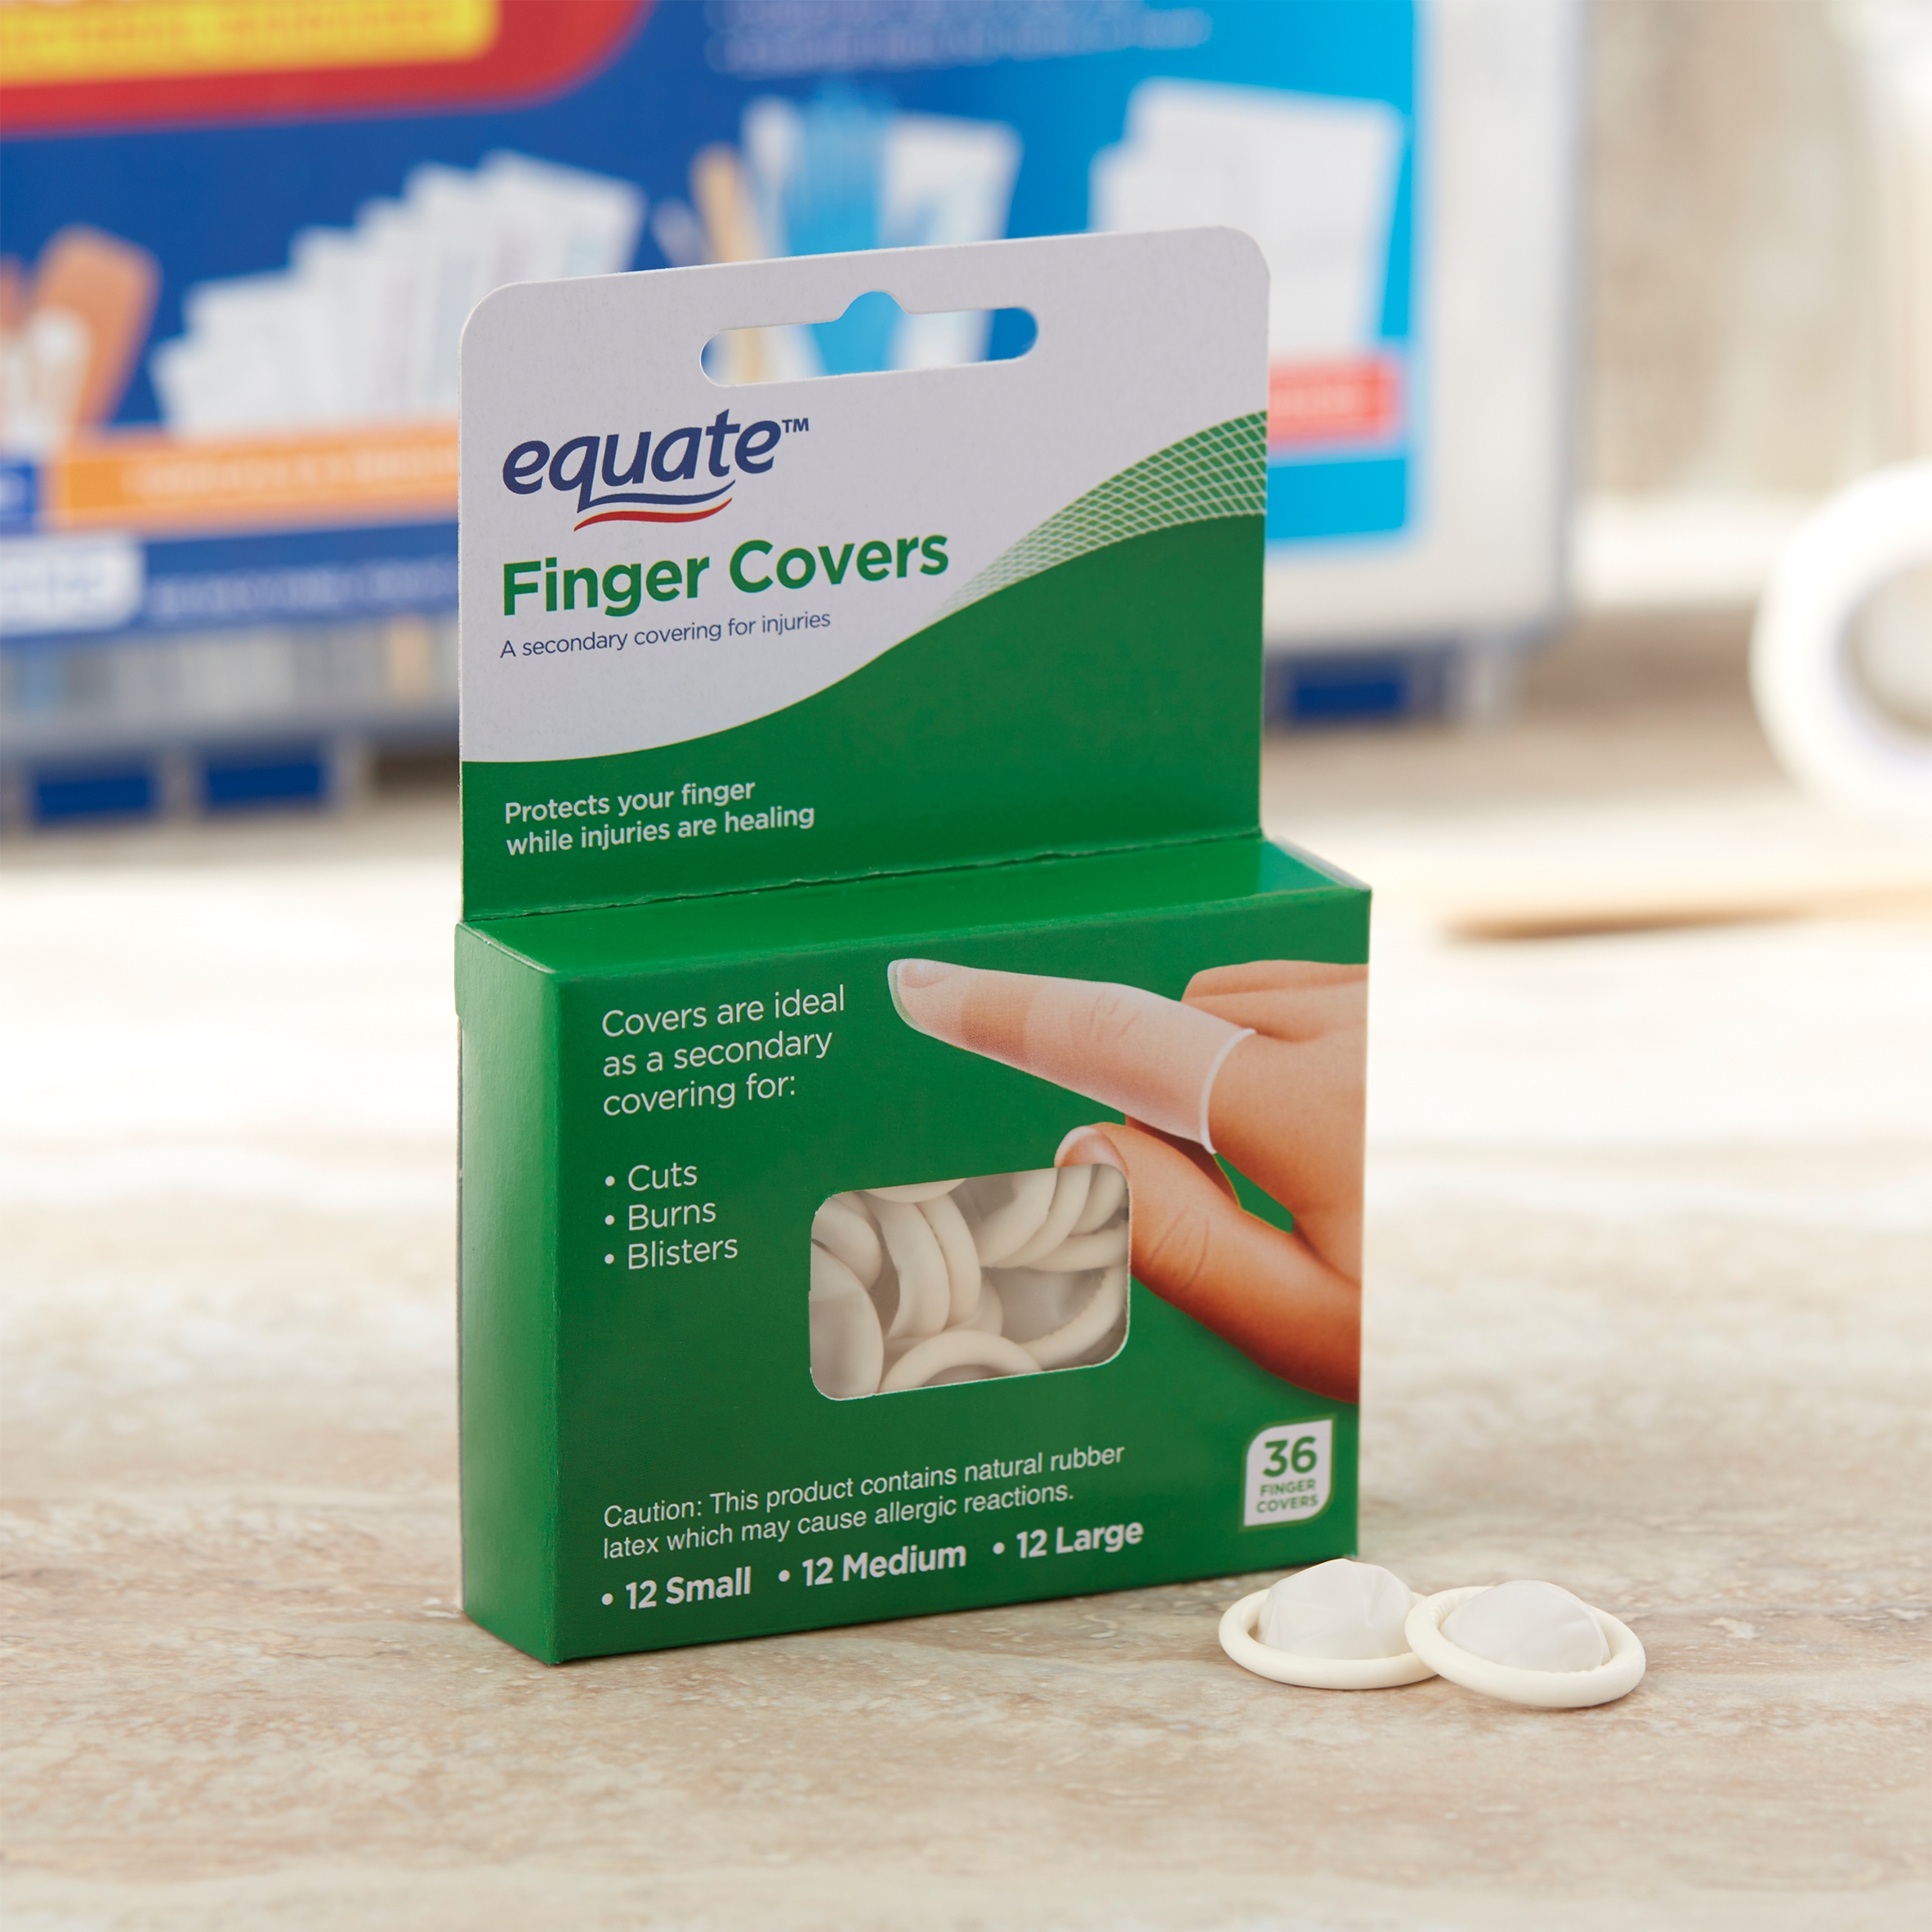 Equate Latex Finger Covers, 36 Count - image 3 of 8